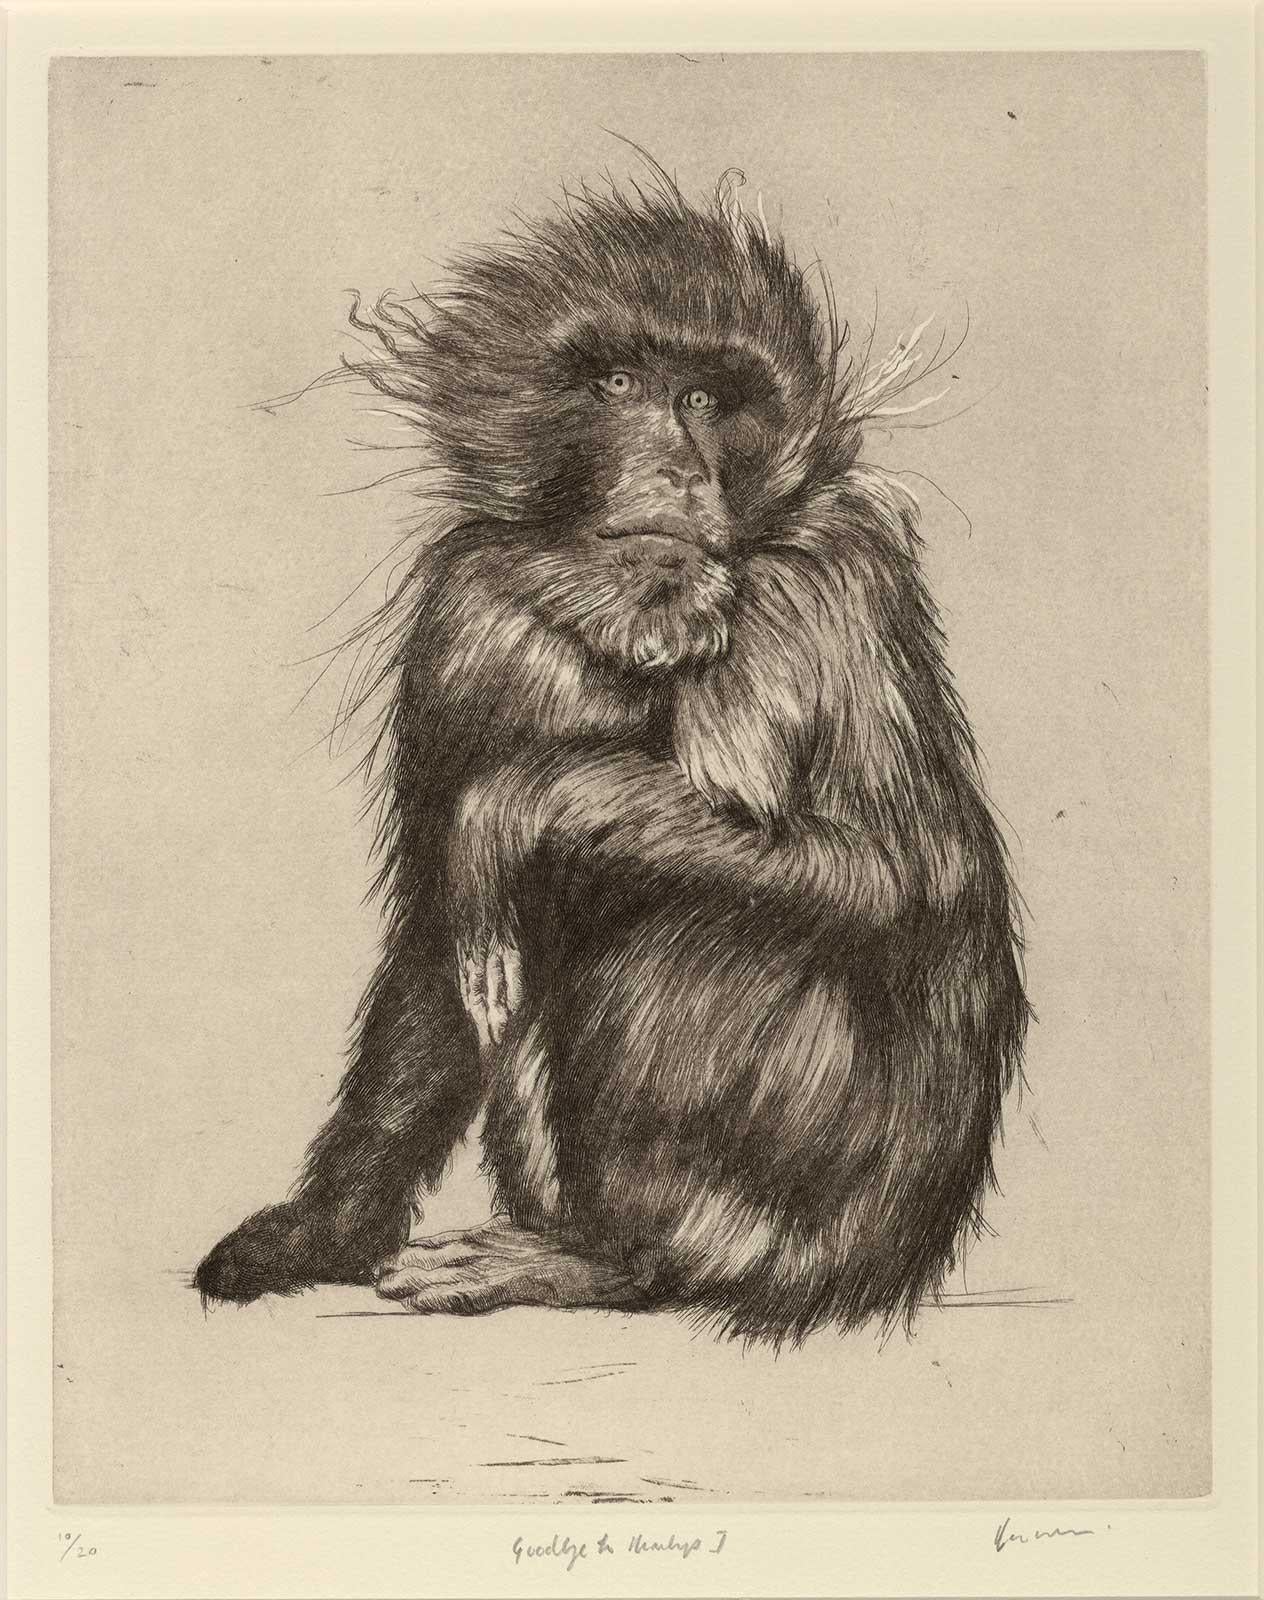 This impression is #10 from an edition of only 20.

The ‘Goodbye to Monkeys’ series of etchings with aquatint well demonstrates Wilson’s skill and sensitivity – both in terms of his choice of medium for these works (he is a skilled draughtsman and